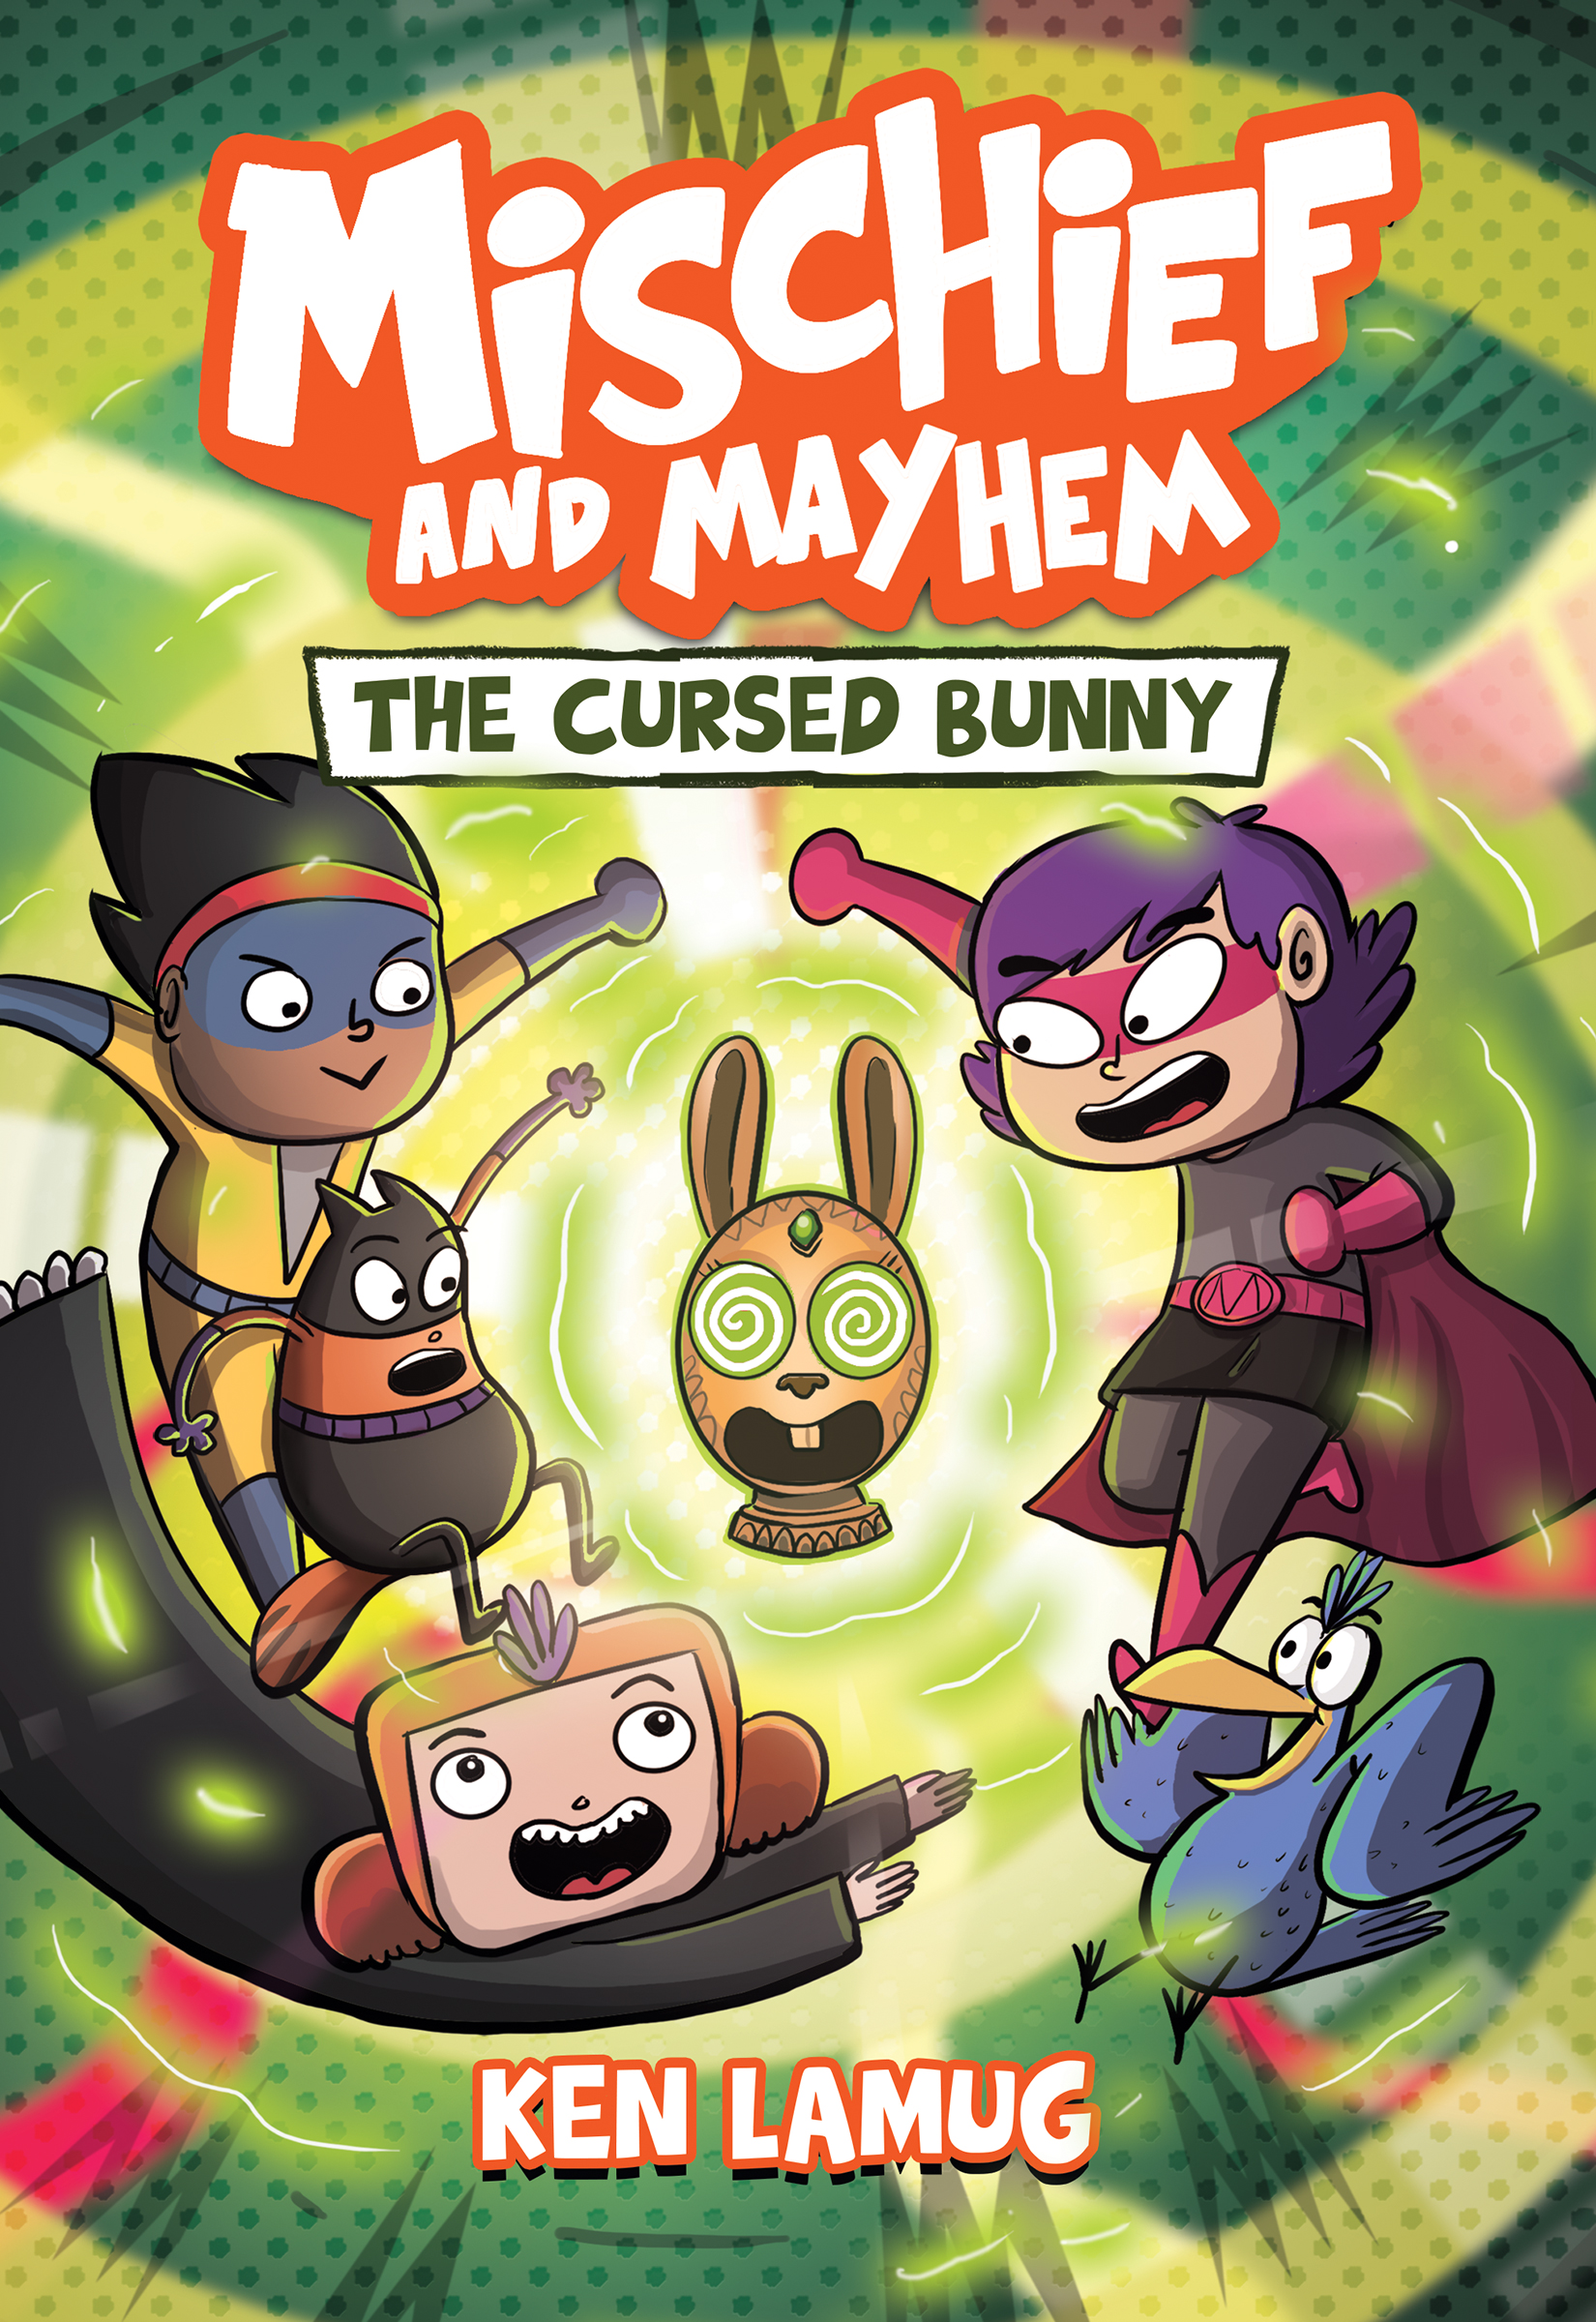 THE WAIT IS OVER! It’s Mischief and Mayhem Month!